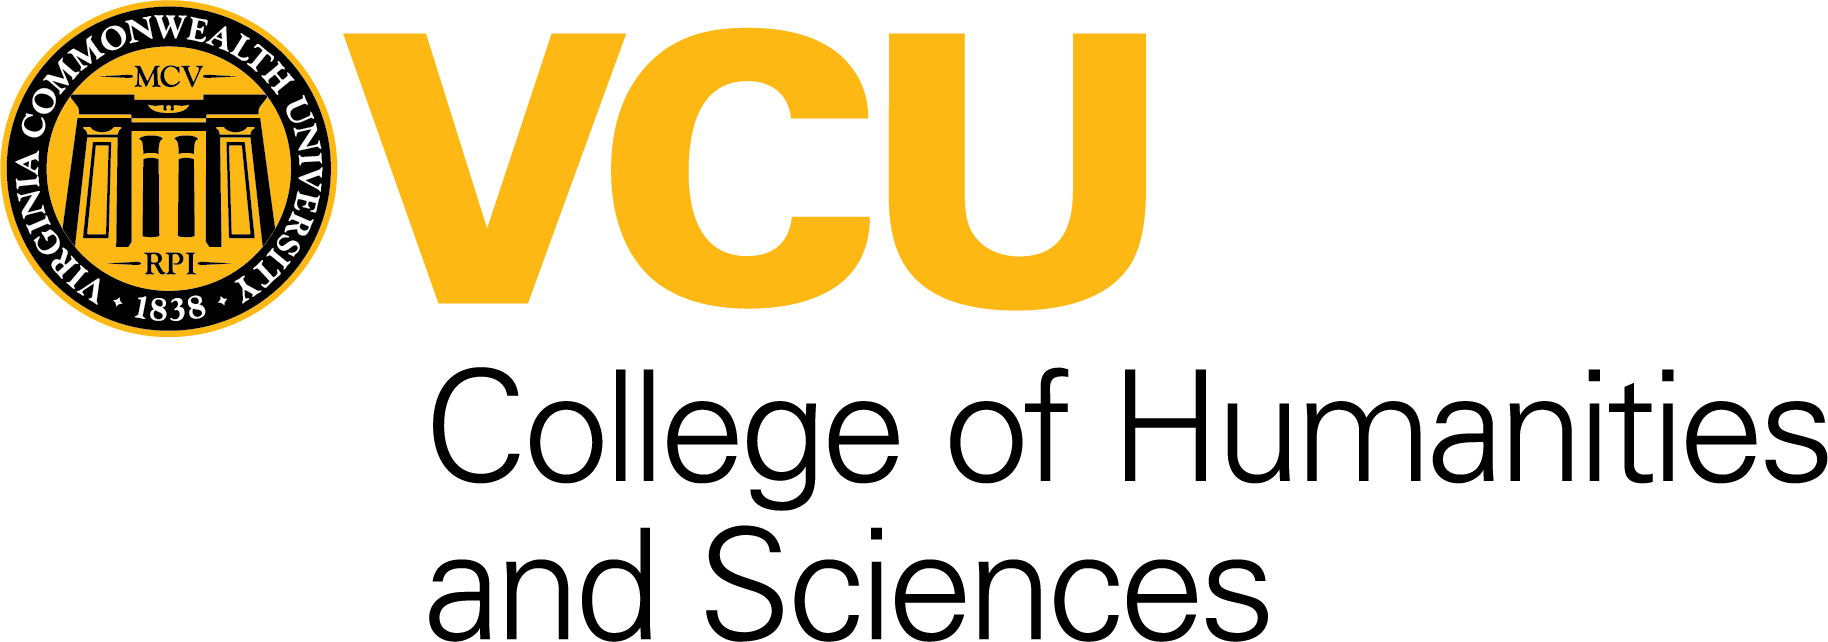 VCU College of Humanities and Sciences